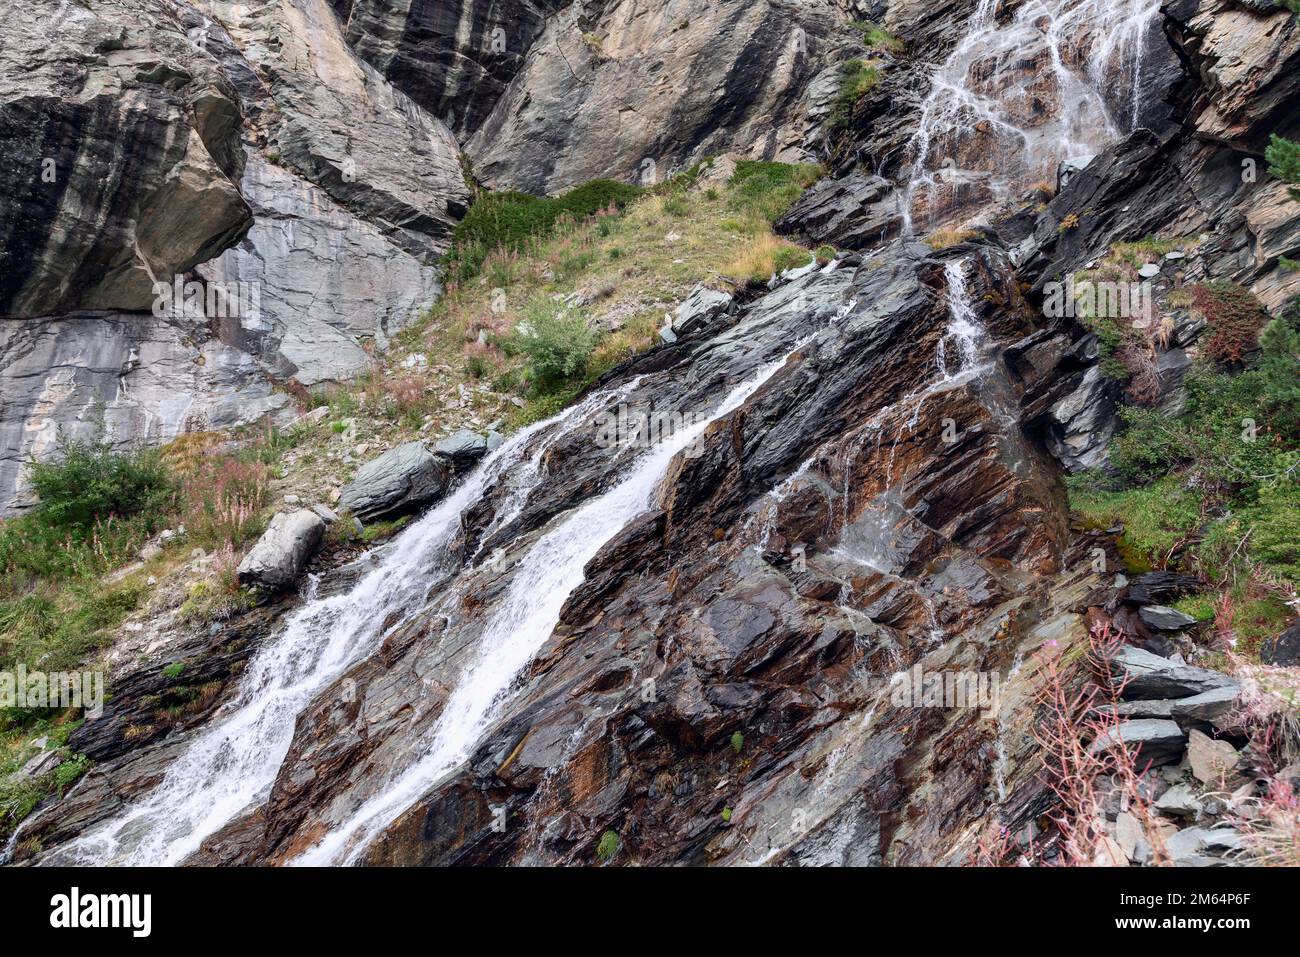 Sparse but very diverse green autumn vegetation of mosses and herbs on brown karst granite rocks washed by the foamy waters of an alpine waterfall Stock Photo